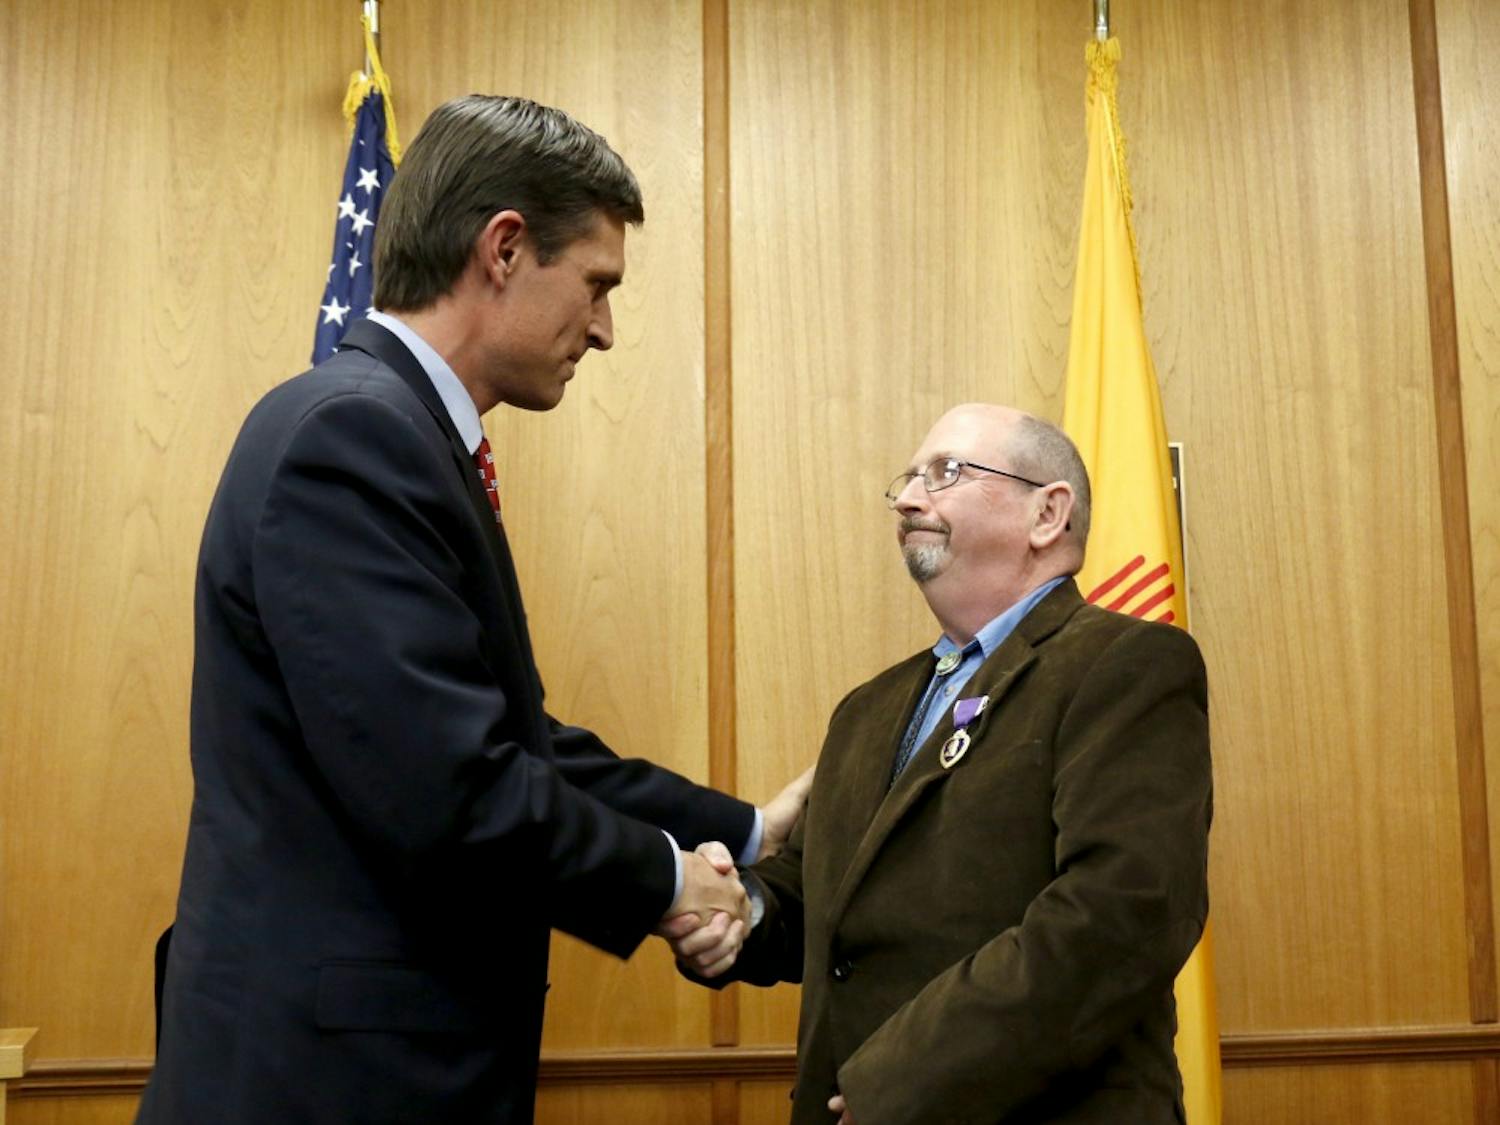 Senator Martin Heinrich shakes hands with&nbsp;Stephen Bailey after presenting him with a purple heart. The ceremony took place in the Roberts in&nbsp;Scholes Hall on Dec. 4, 2015.